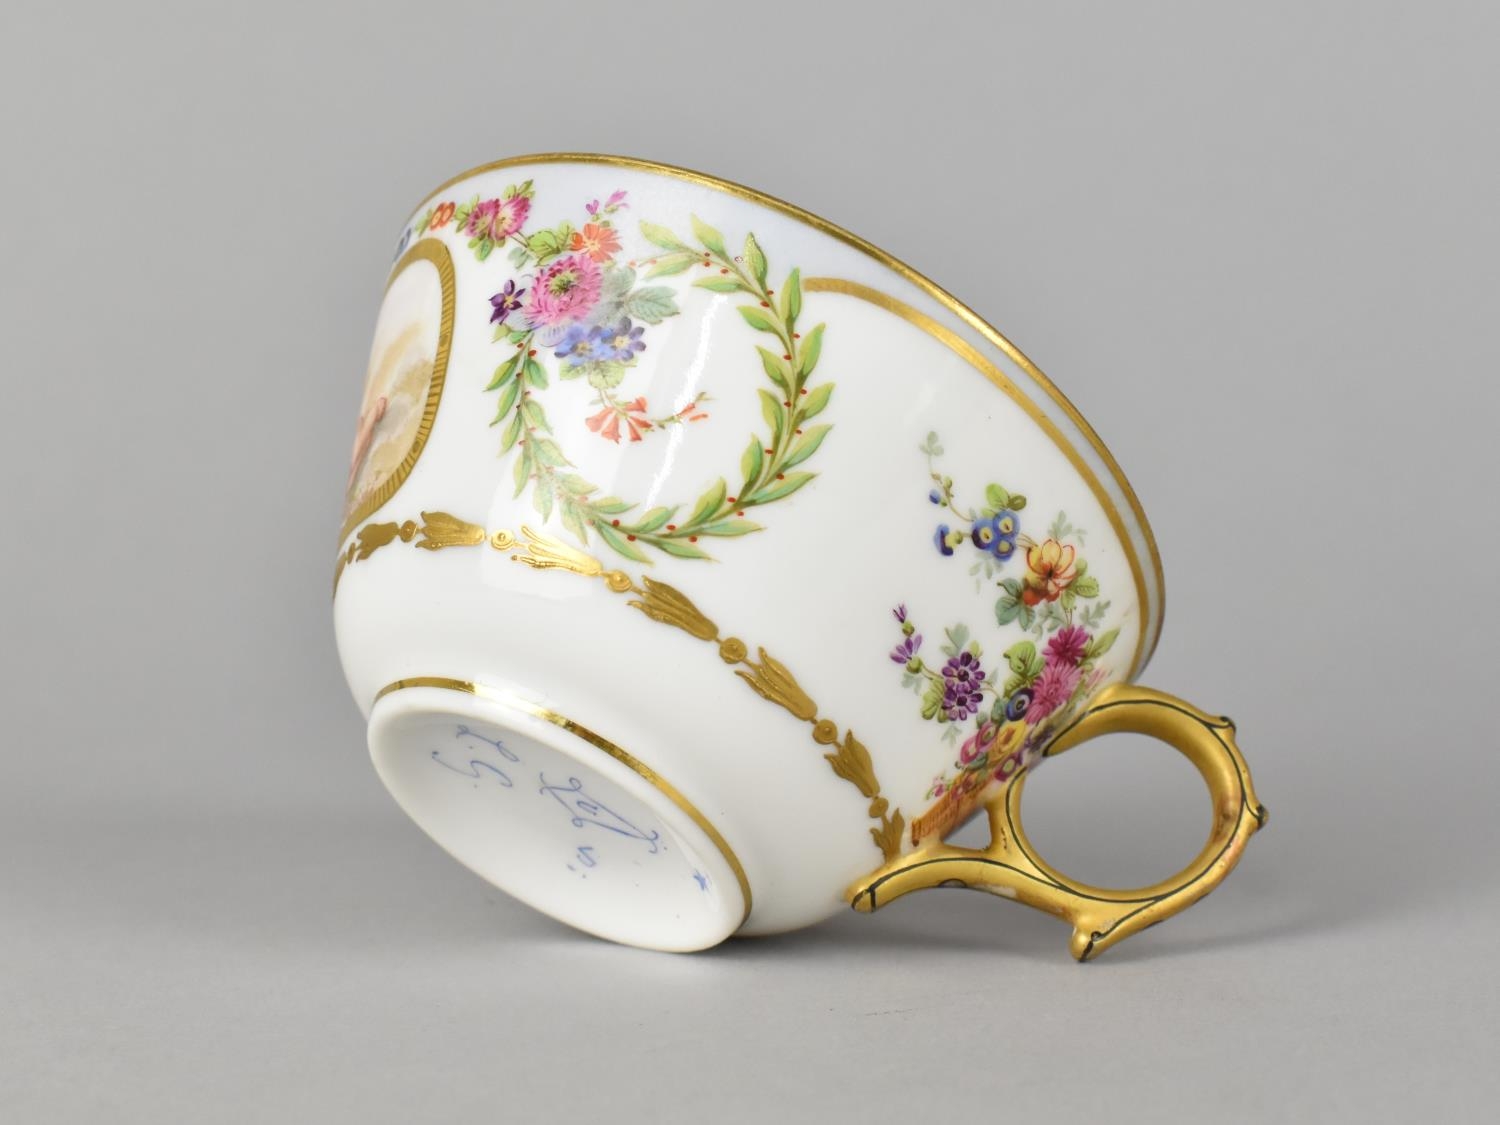 A Sevres Porcelain Cup Decorated with Cherub Cartouche with Gilt Detailing, Laurel Wreaths and